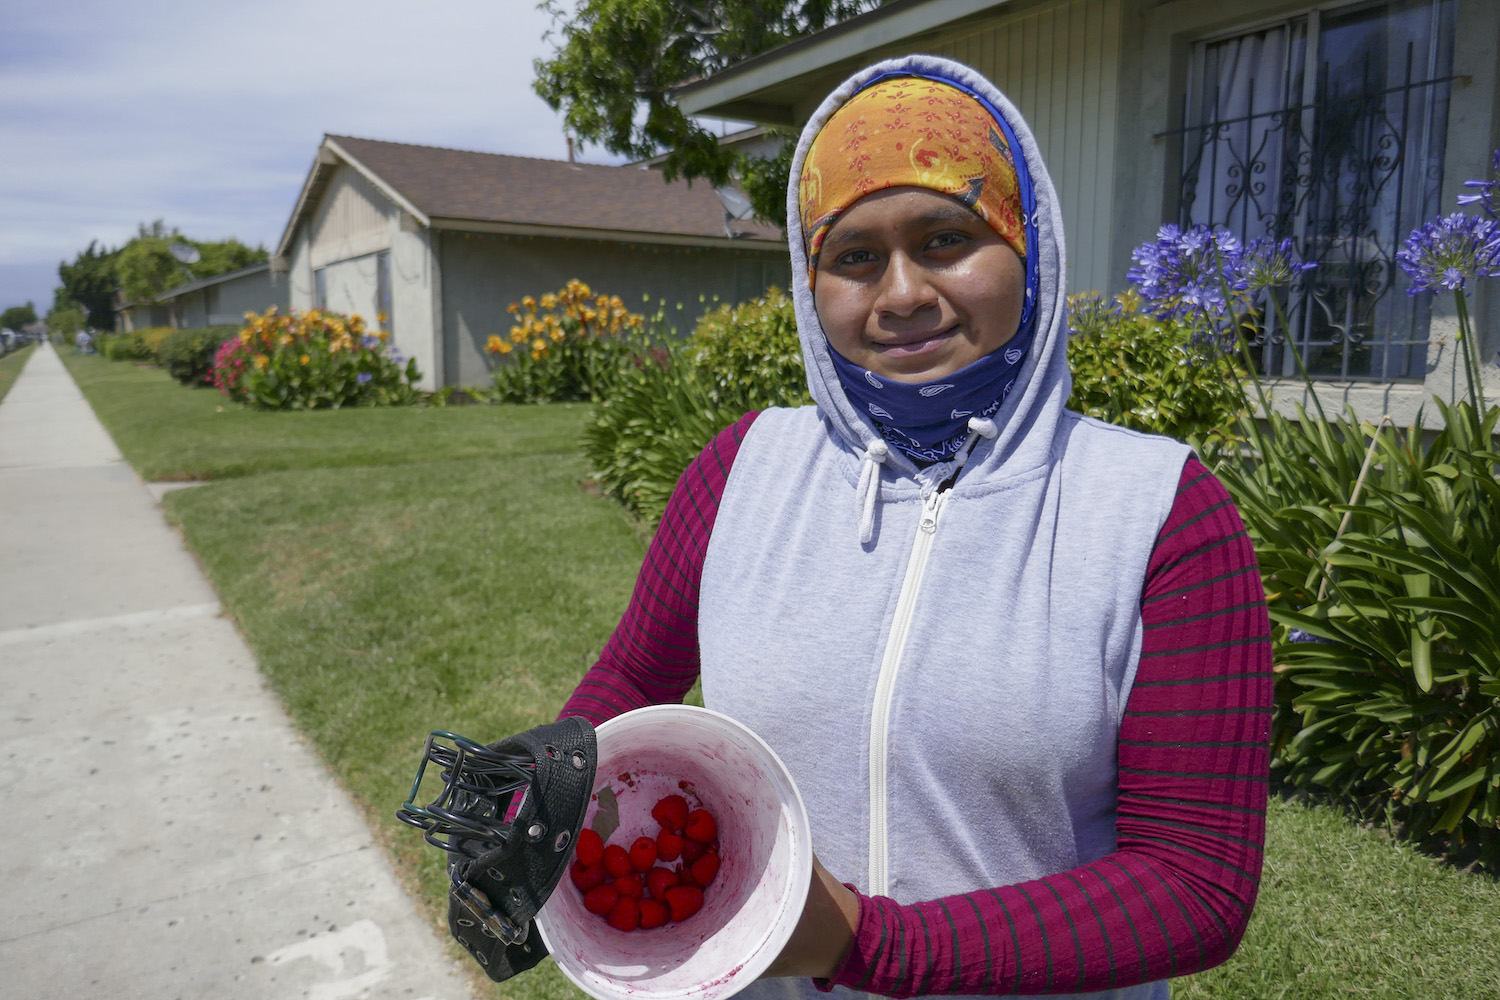 Carla Diaz holds a container of raspberries June 2020